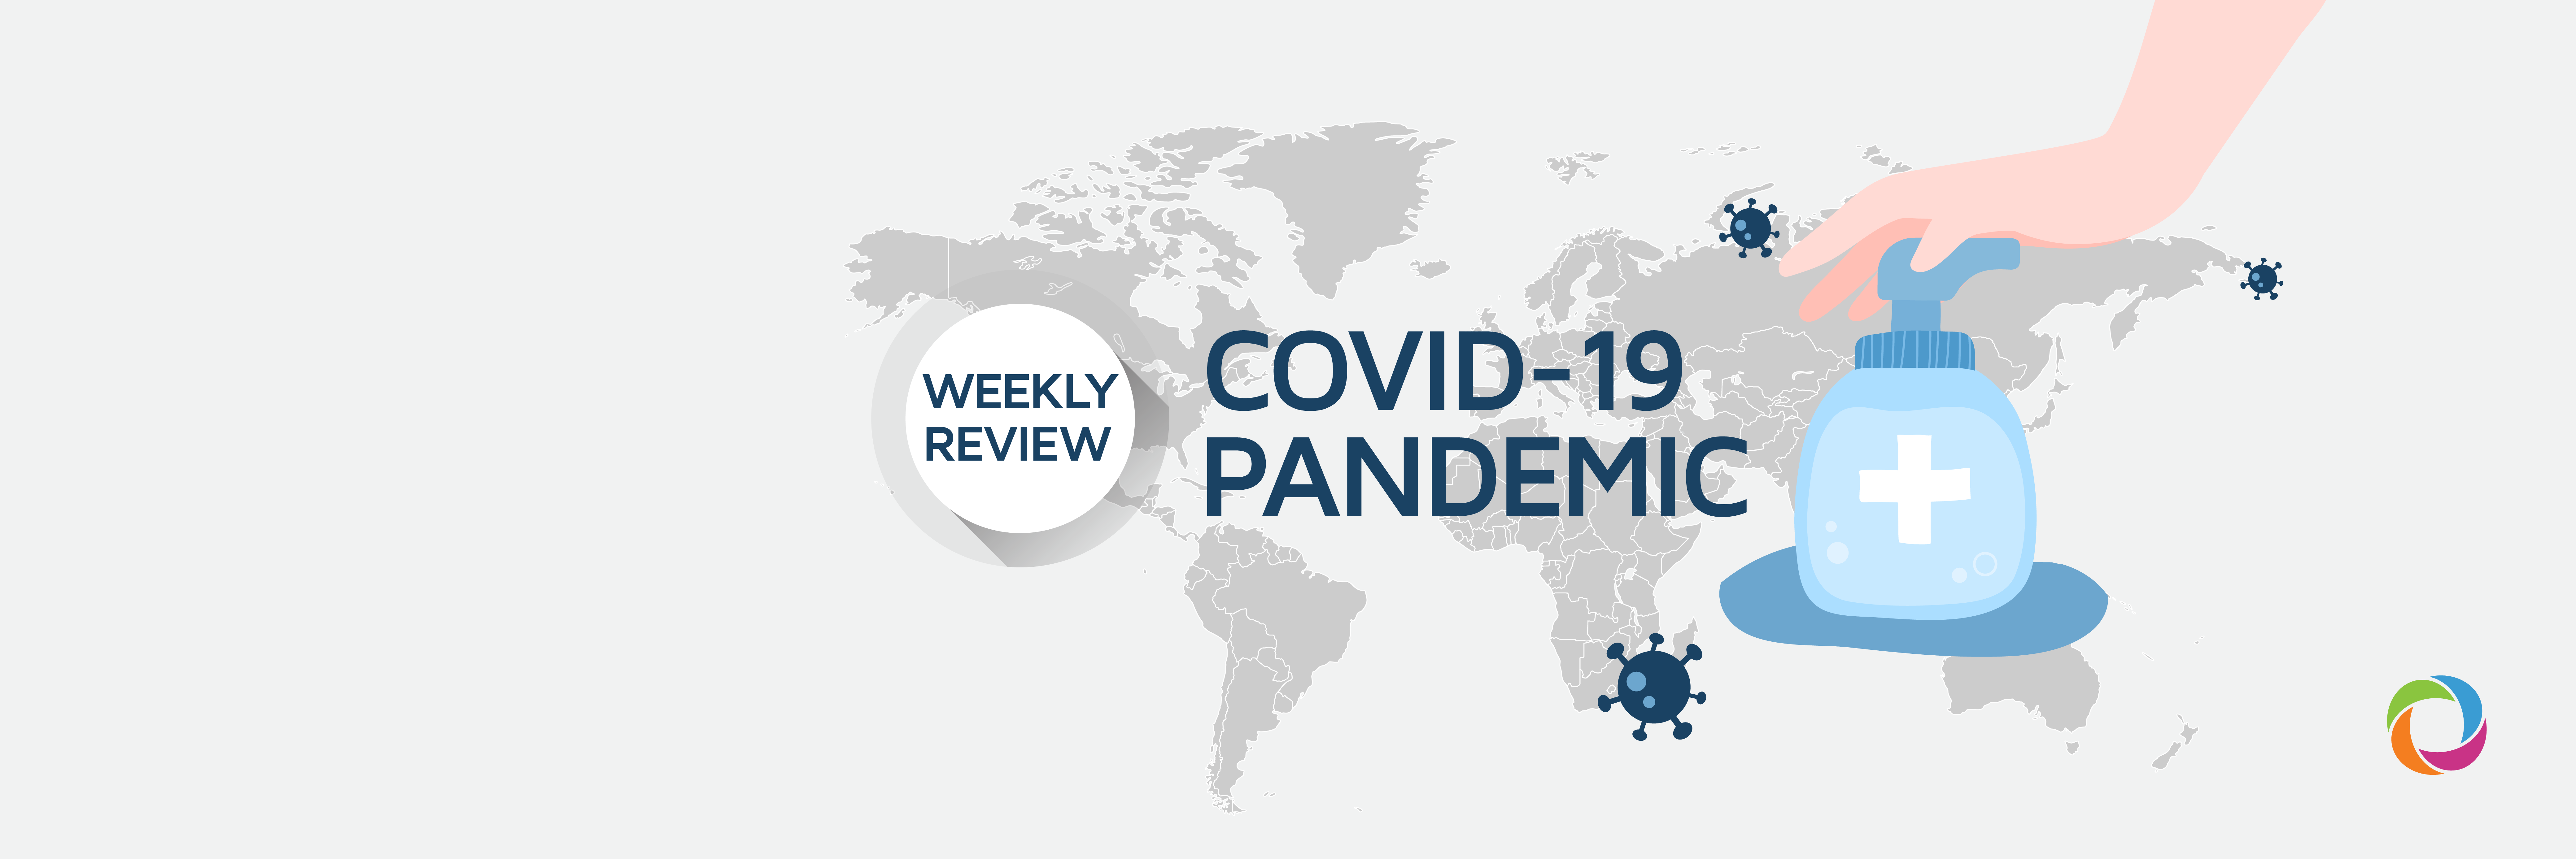 DevelopmentAid weekly review of the coronavirus situation across the world